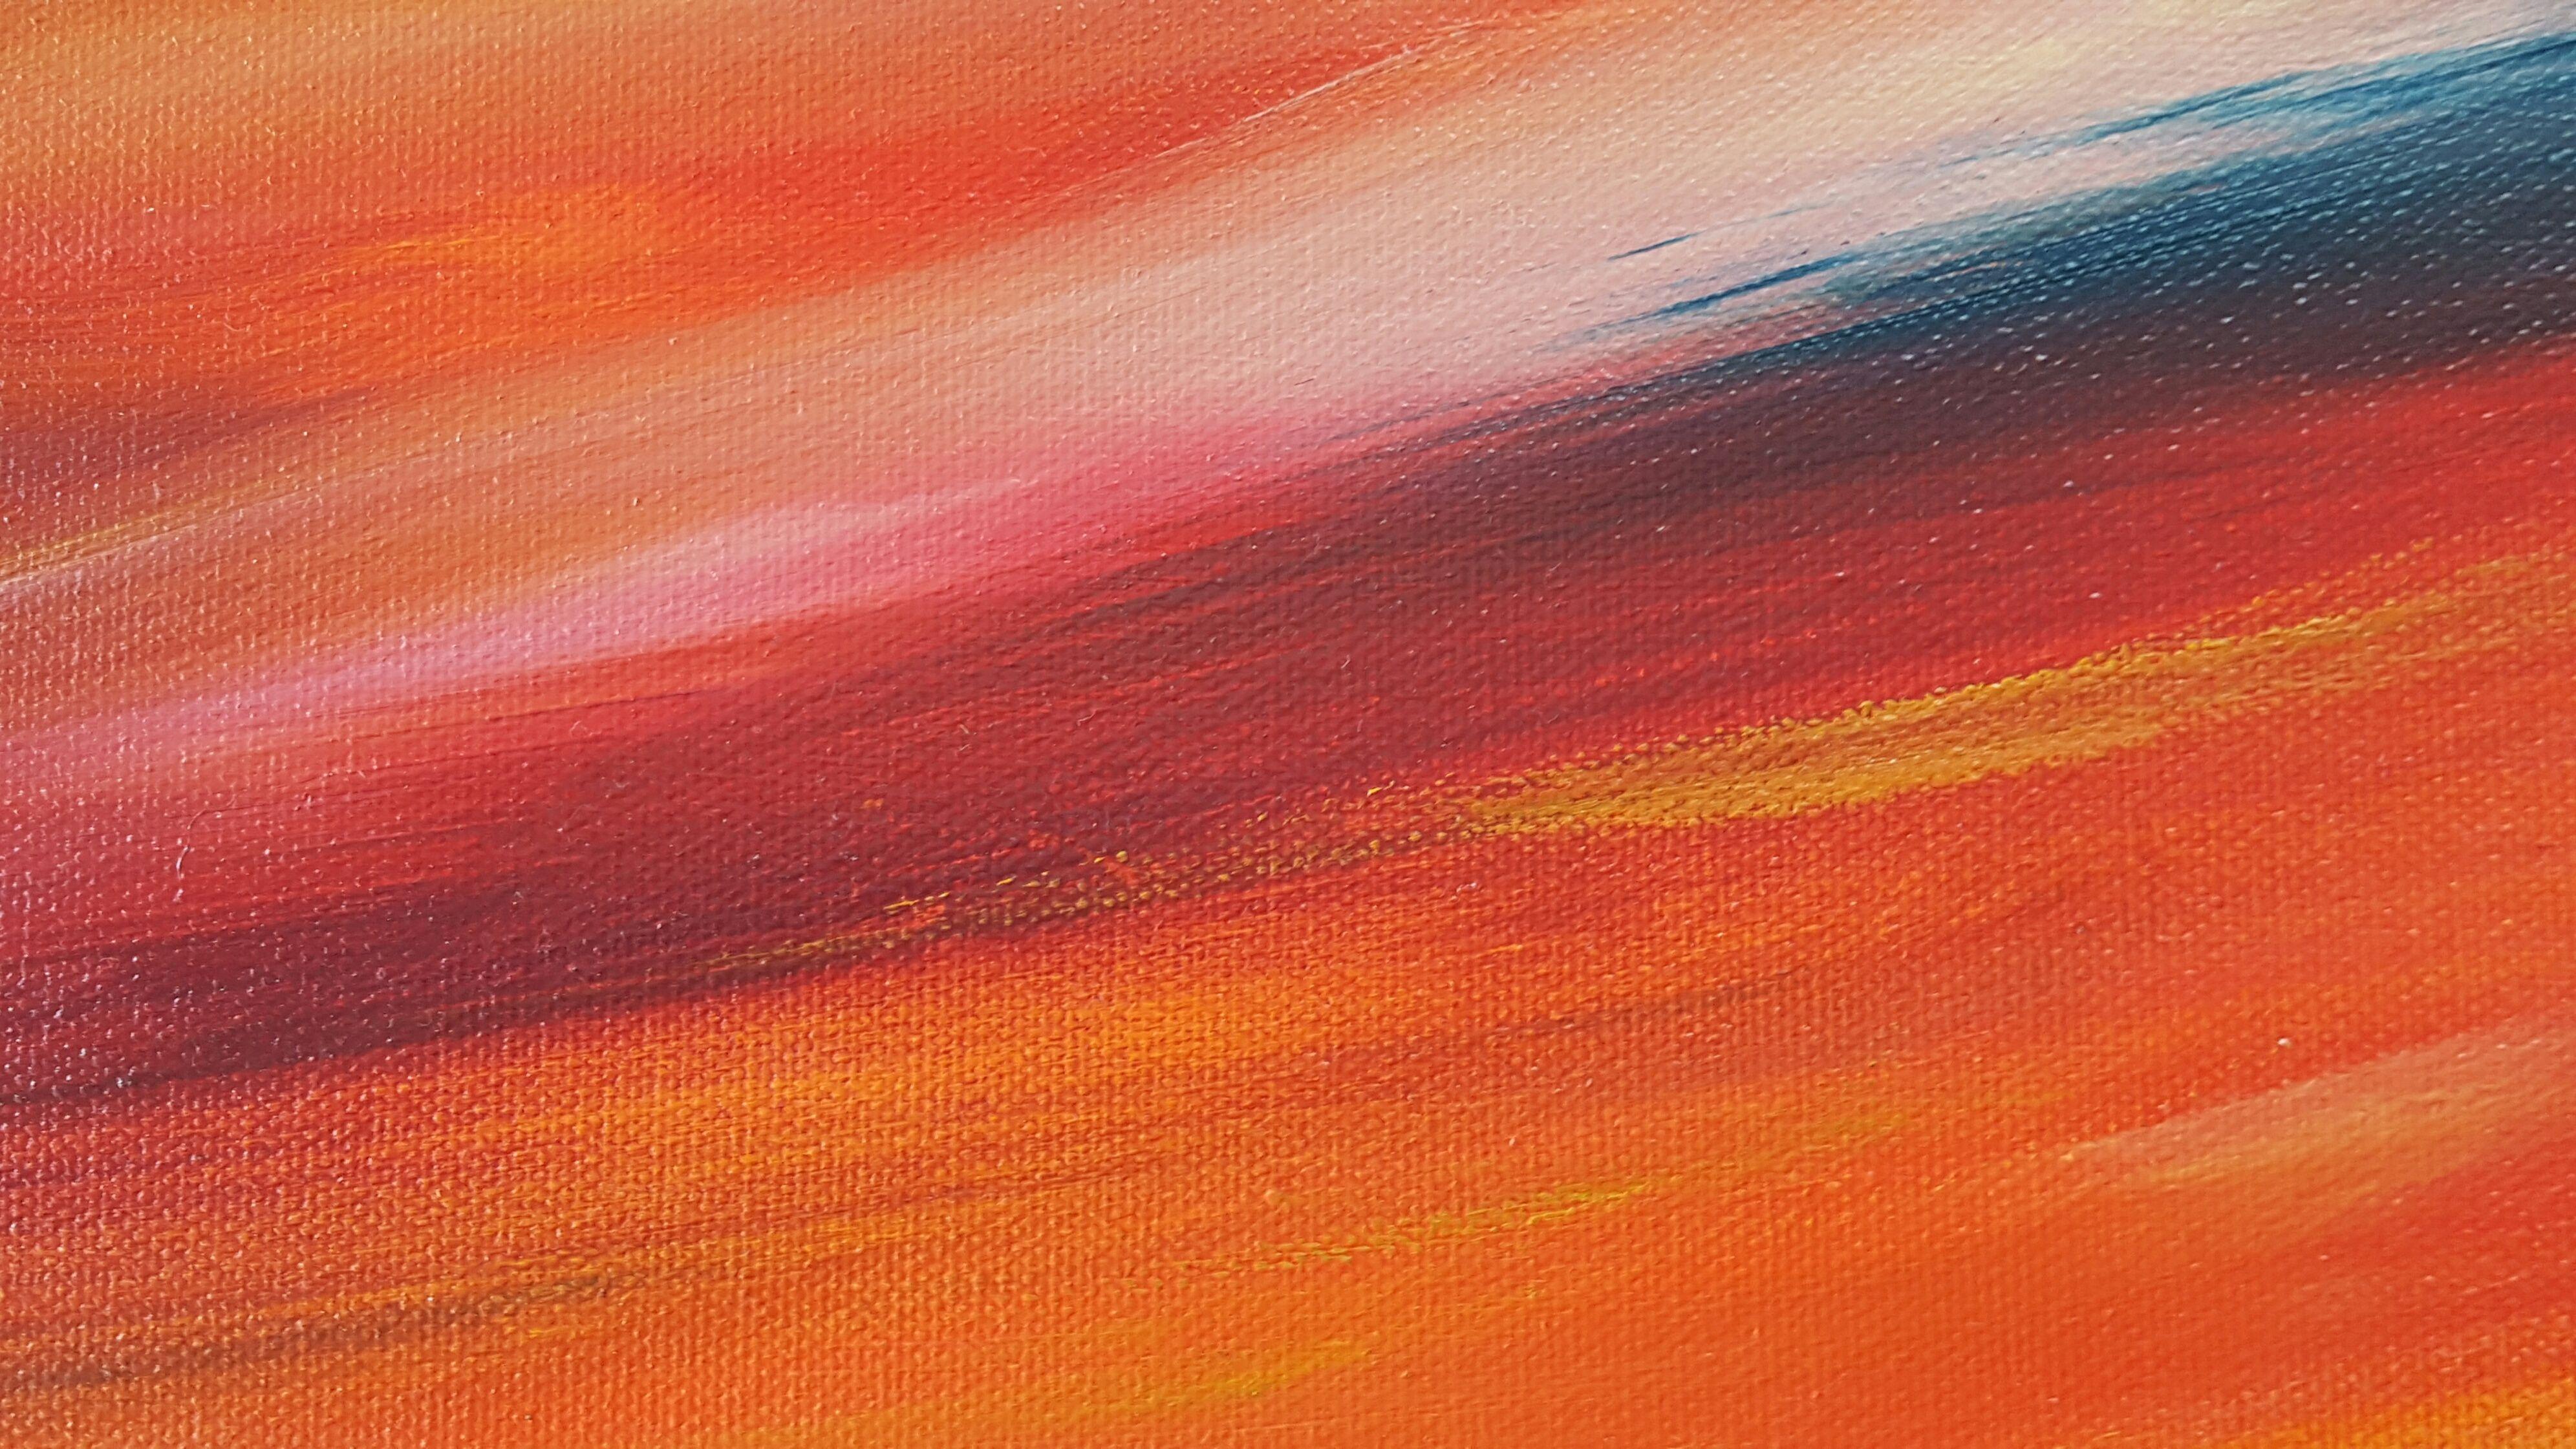 The Red Red skies of Sunset, Painting, Oil on Canvas 2